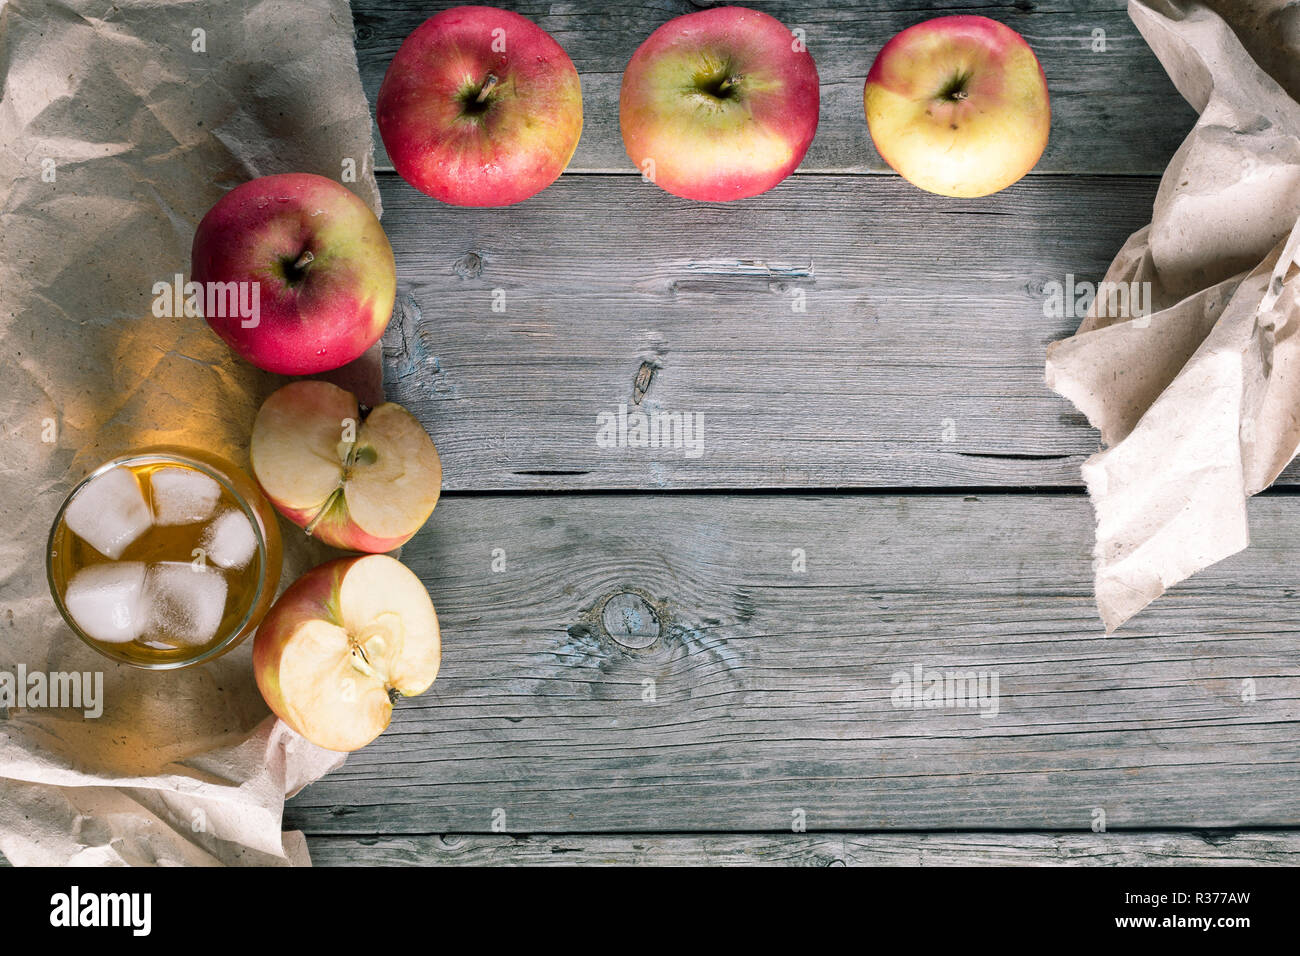 Some apples and a glass of fresh juice Stock Photo